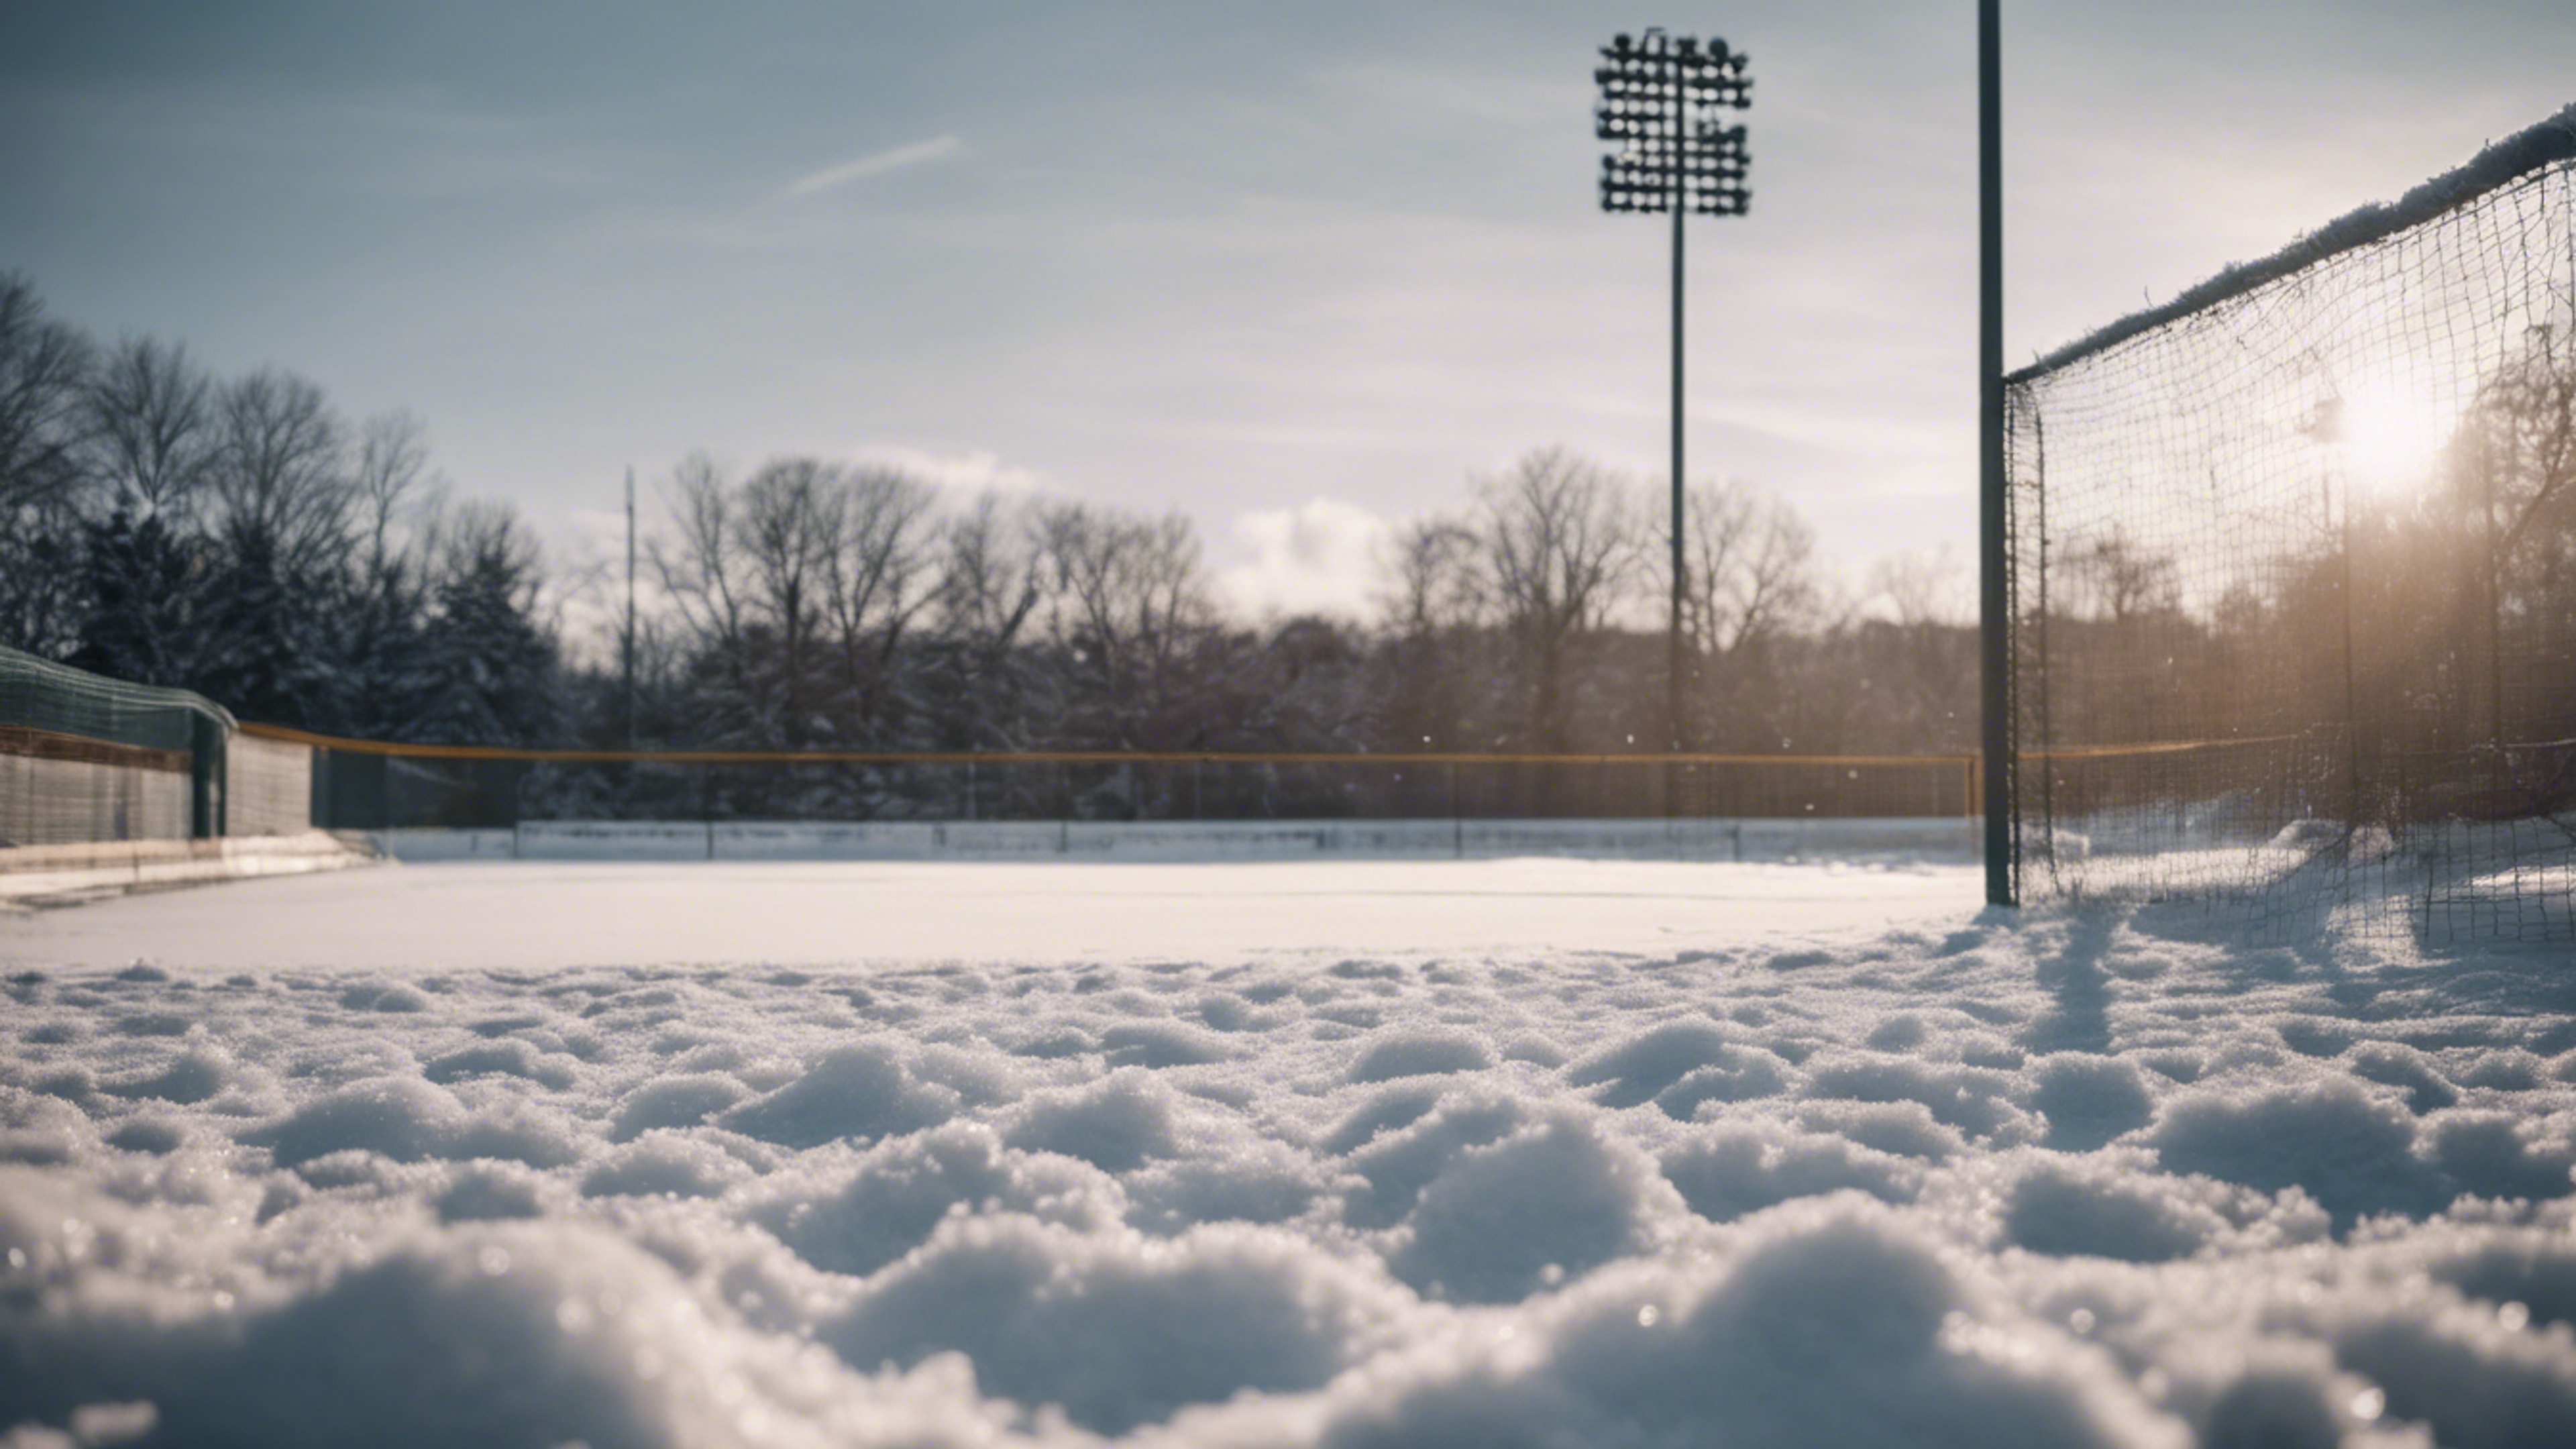 A baseball field covered in a thin layer of snow during off-season. Tapeta[abf98c57f7b048239f2f]